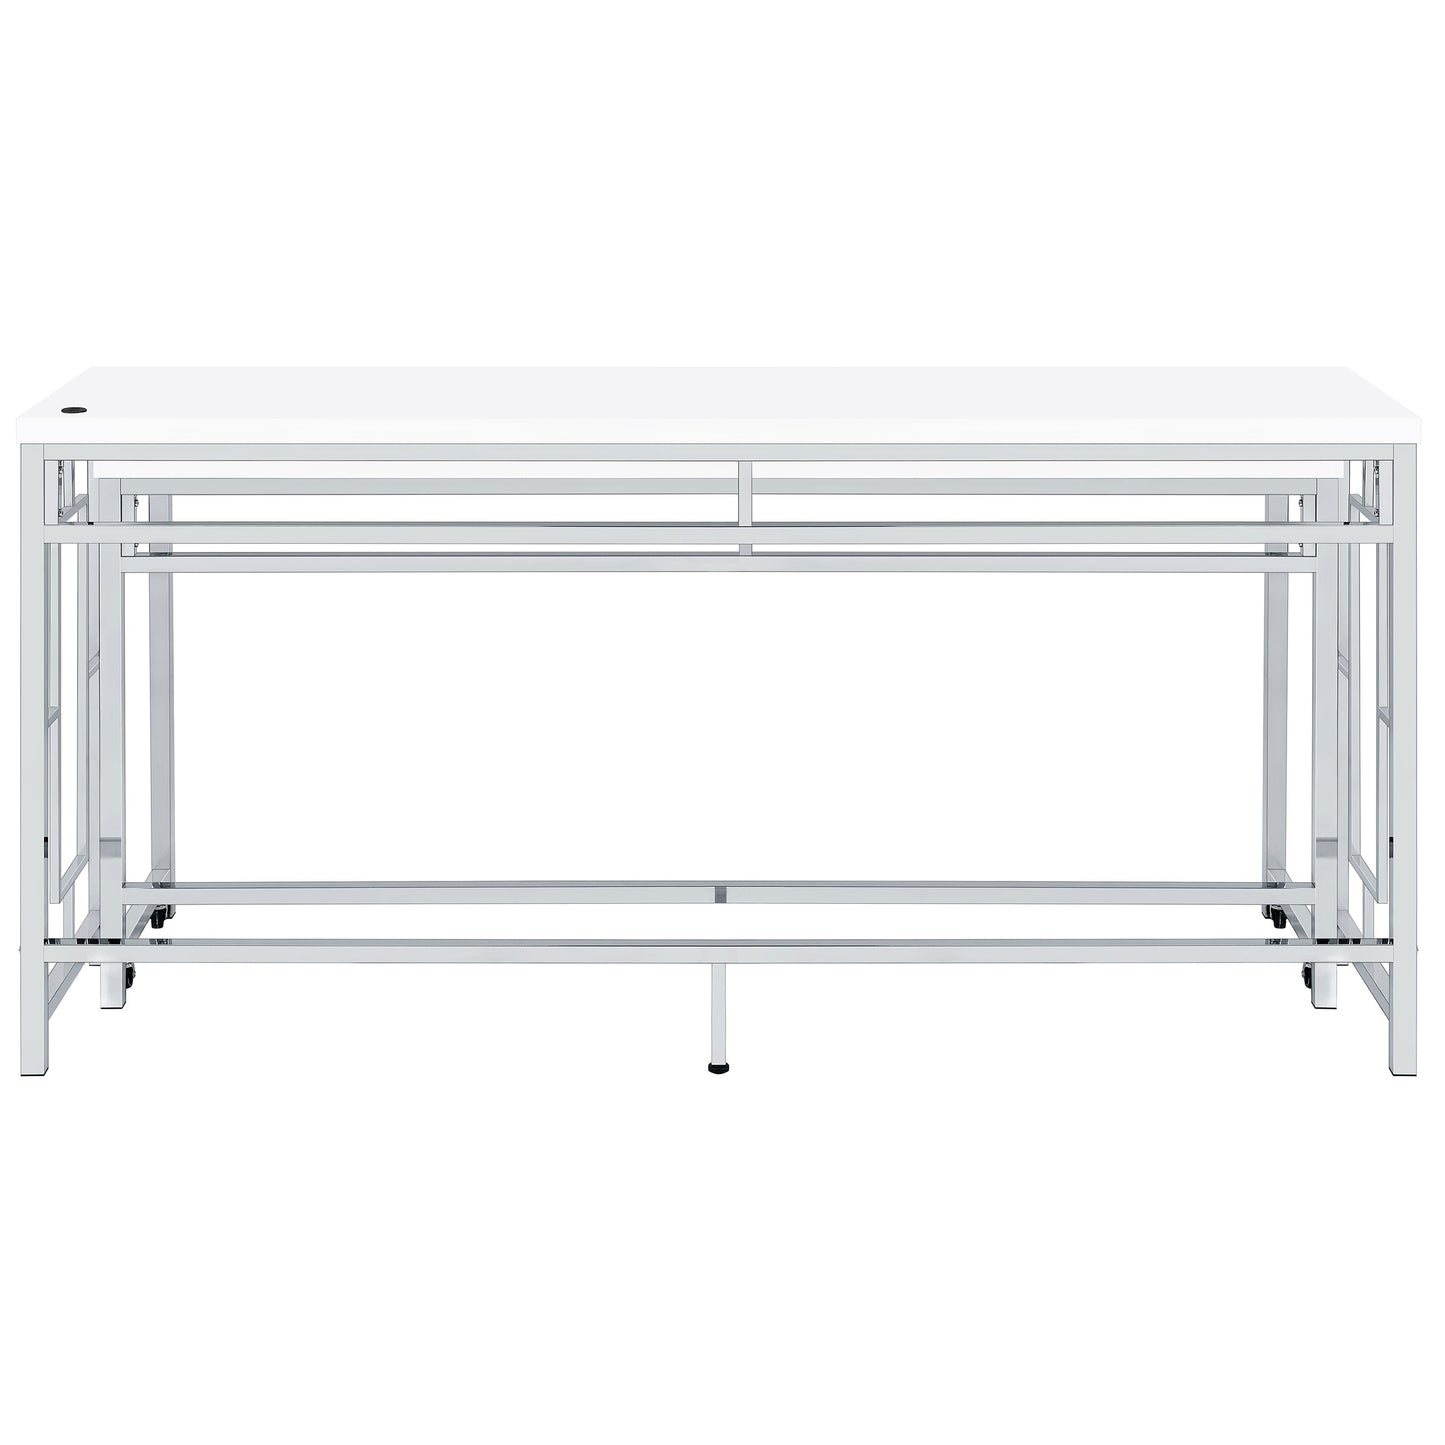 Jackson 5-piece Multipurpose Counter Height Table Set White and Chrome